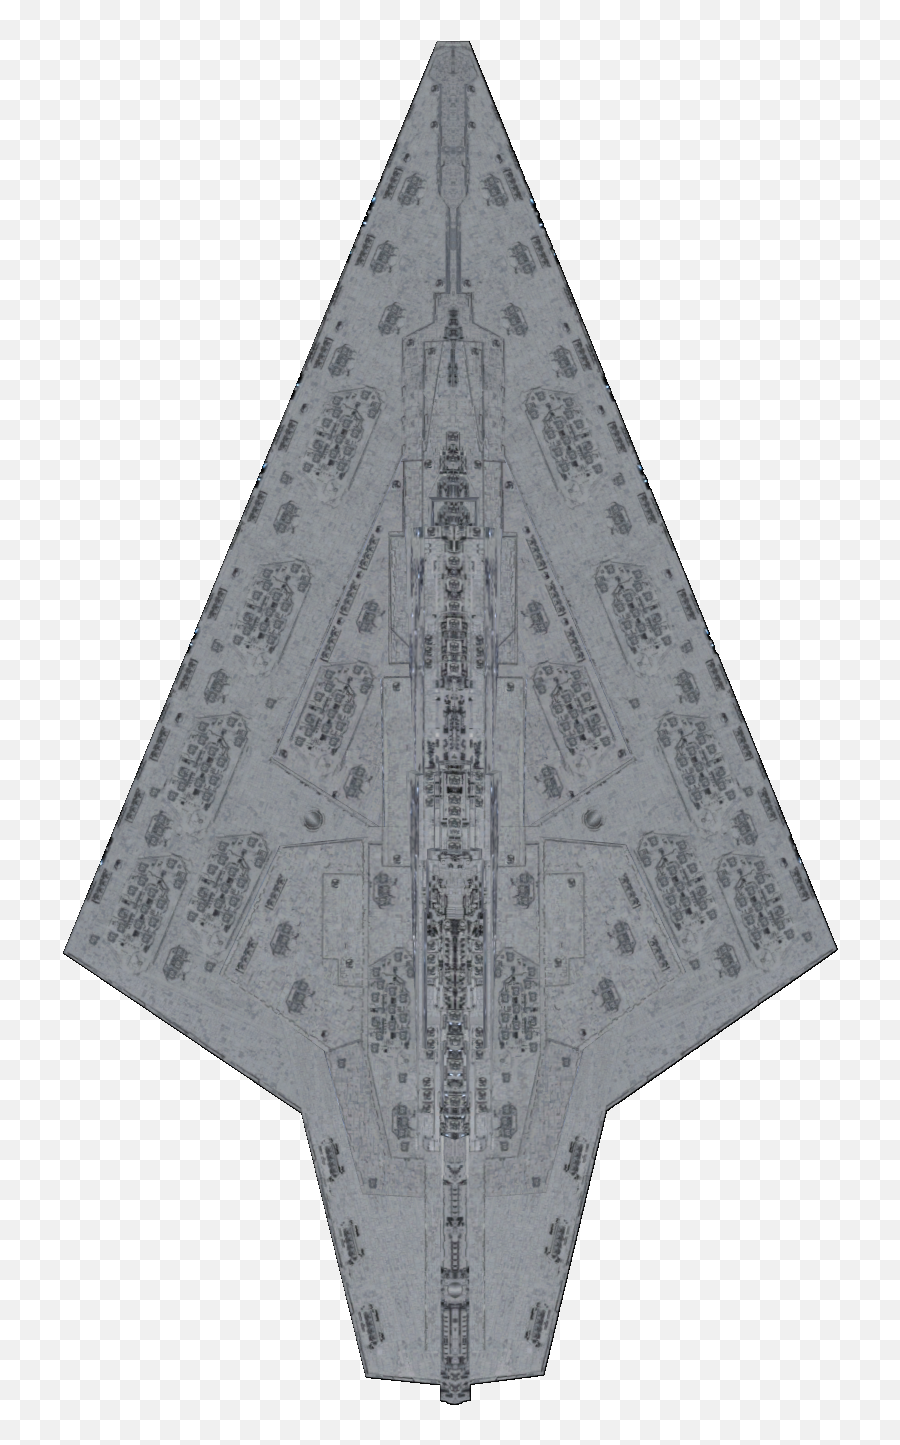 Image Result For Star Wars Ship - Lampshade Png,Star Wars Ships Png